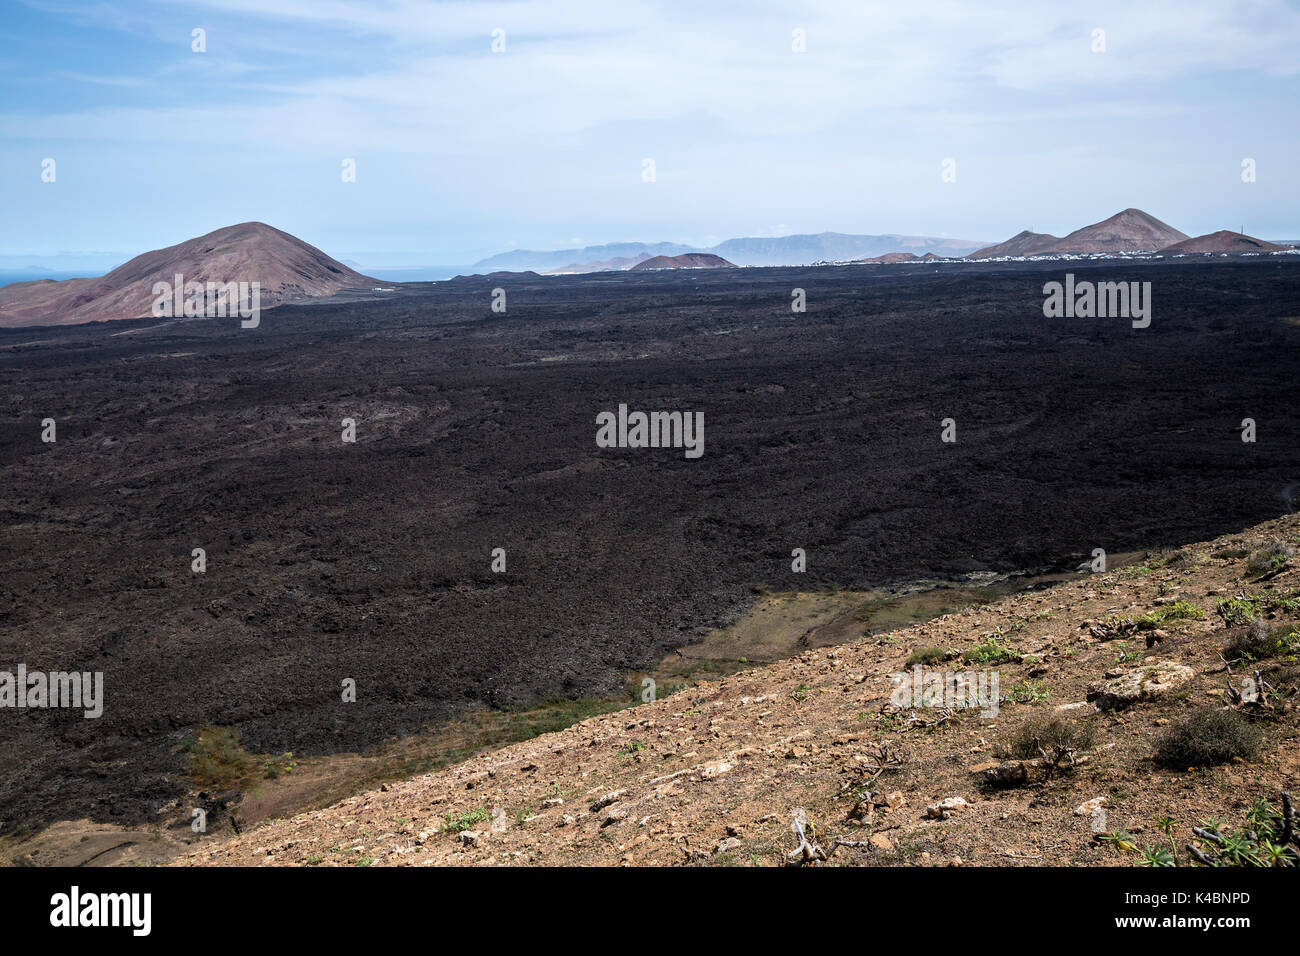 Cold Lava Flow West Of Mancha Blanca In National Park Timanfaya, Lanzarote, Canary Islands, Spain, Europe Stock Photo